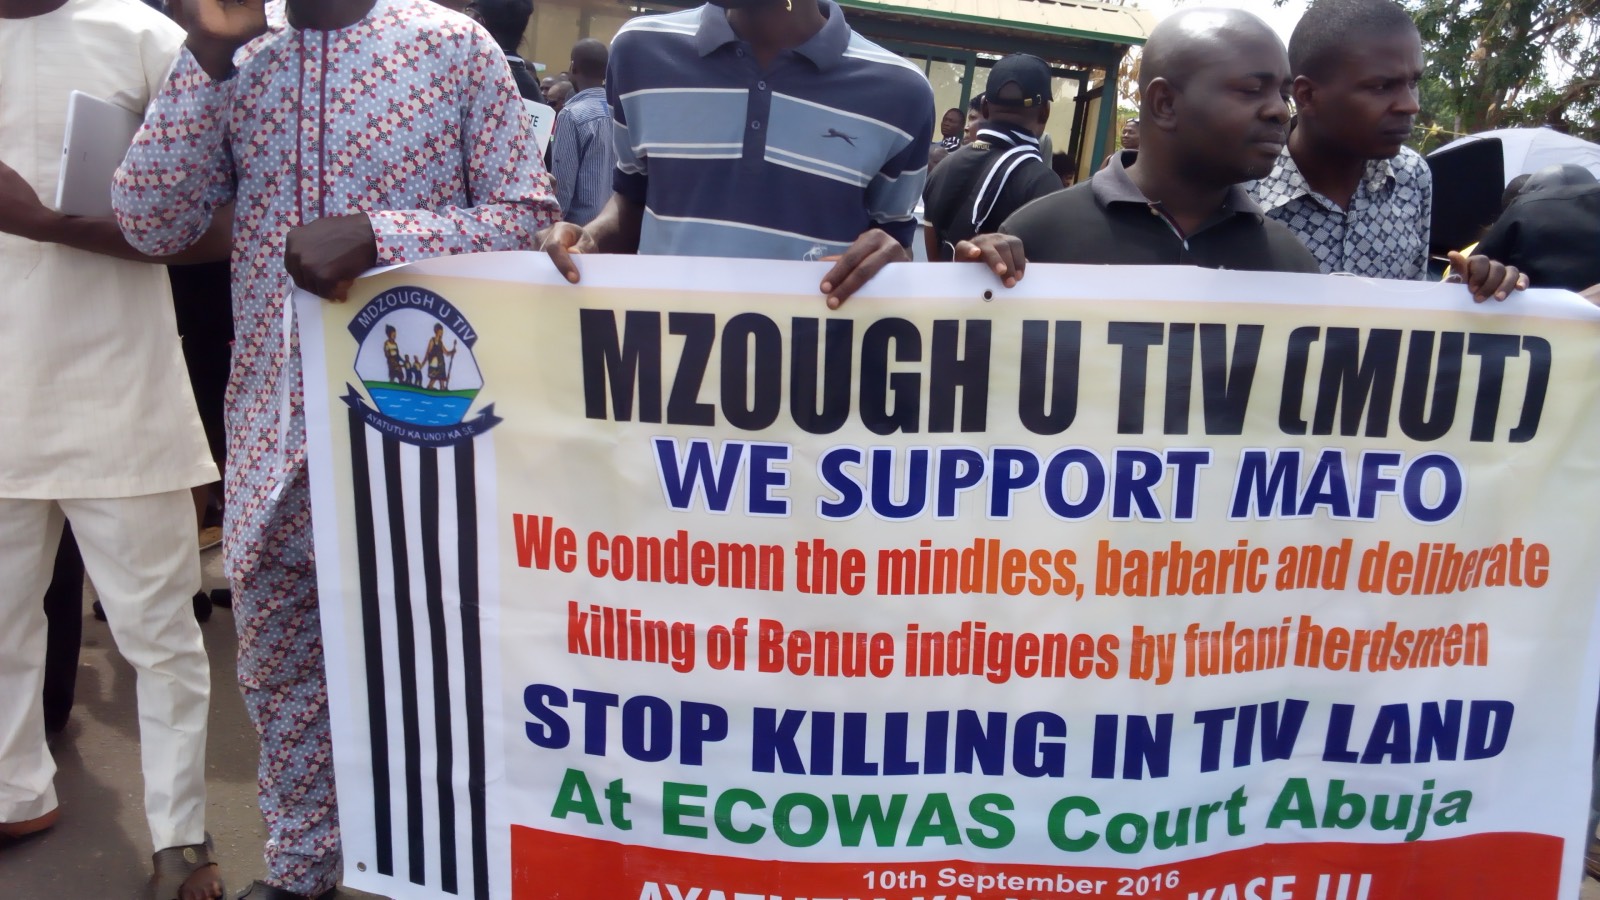 A Benue group, Vanguard Against Tiv Massacre staged a protest at the National Assembly on Thursday, March 16, 2017 against killing of Tiv people by Fulani herdsmen